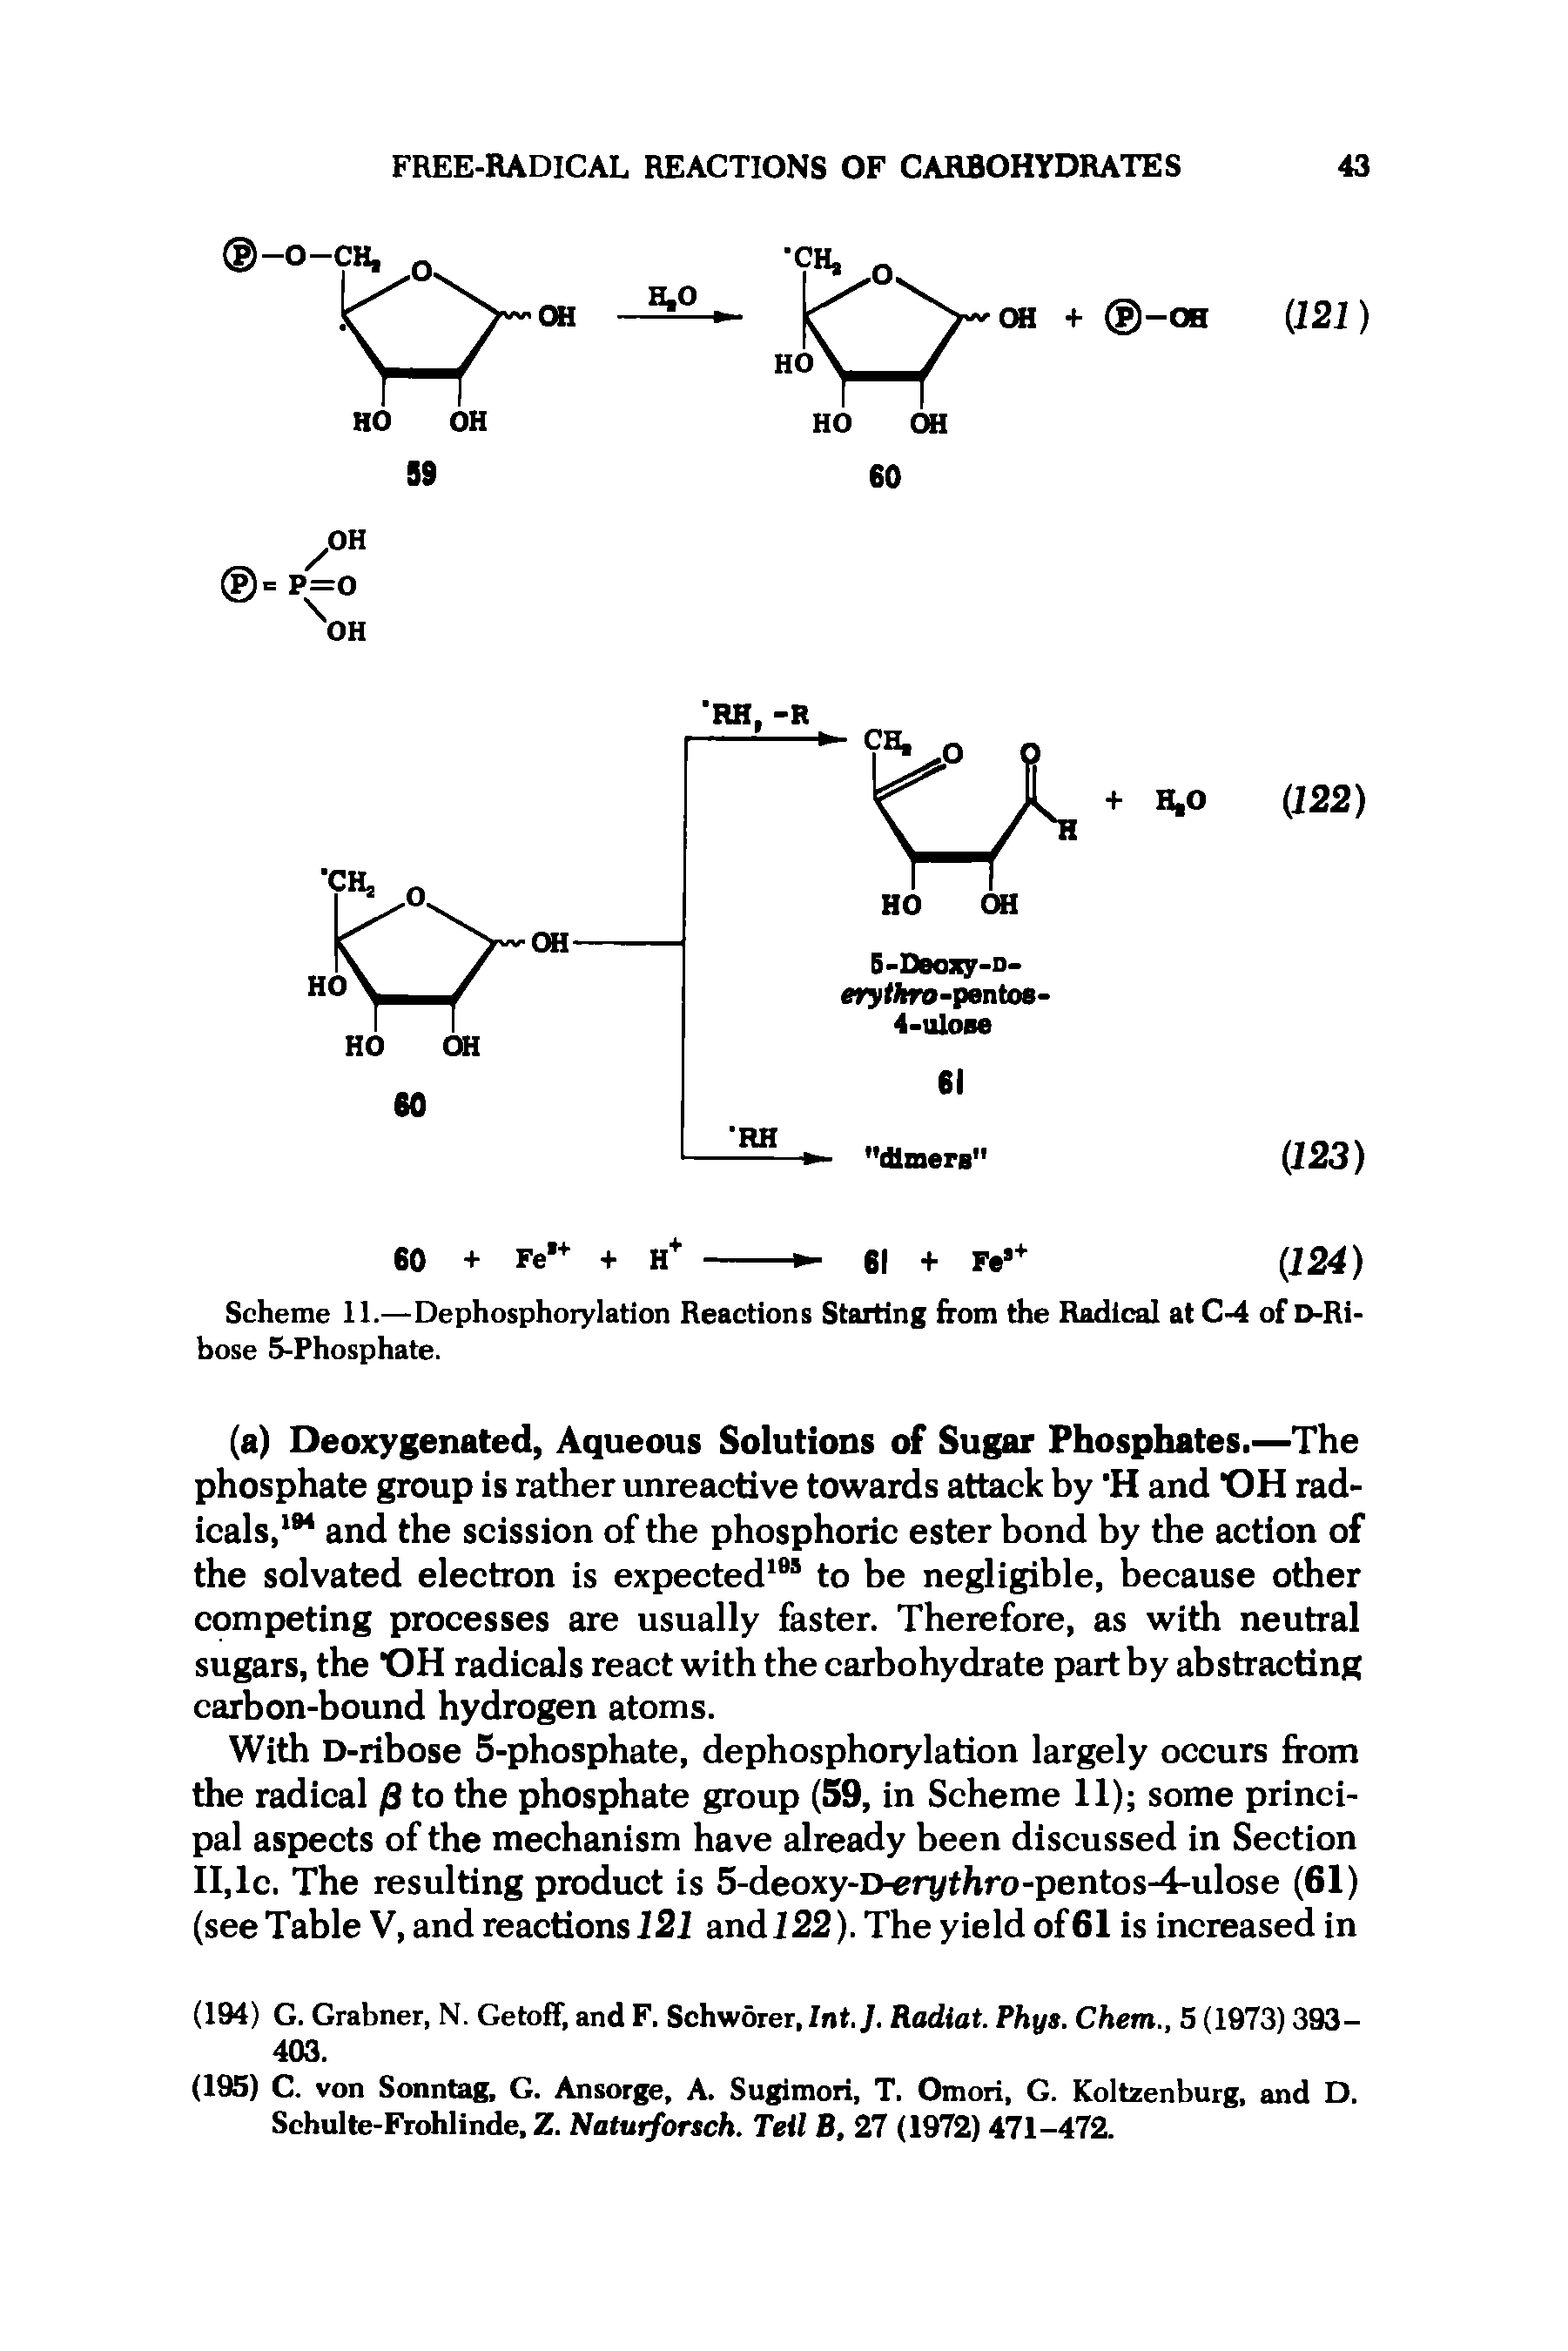 Scheme 11.—Dephosphorylation Reactions Starting from the Radical at C-4 of D-Ri-bose 5-Phosphate.